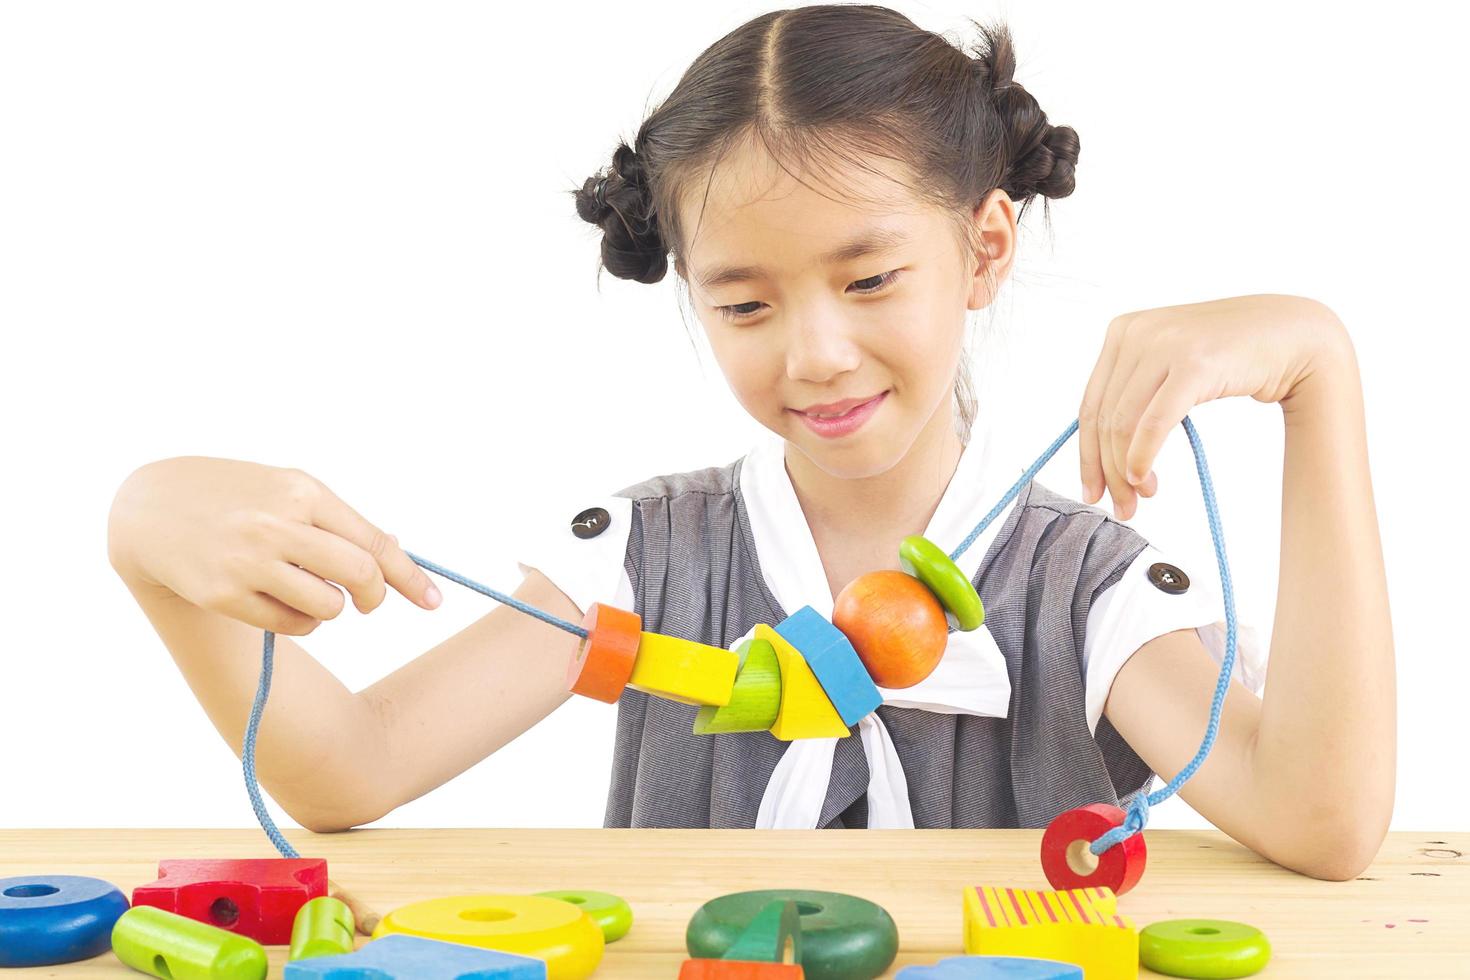 Lovely asian girl is play colorful wood block toy photo